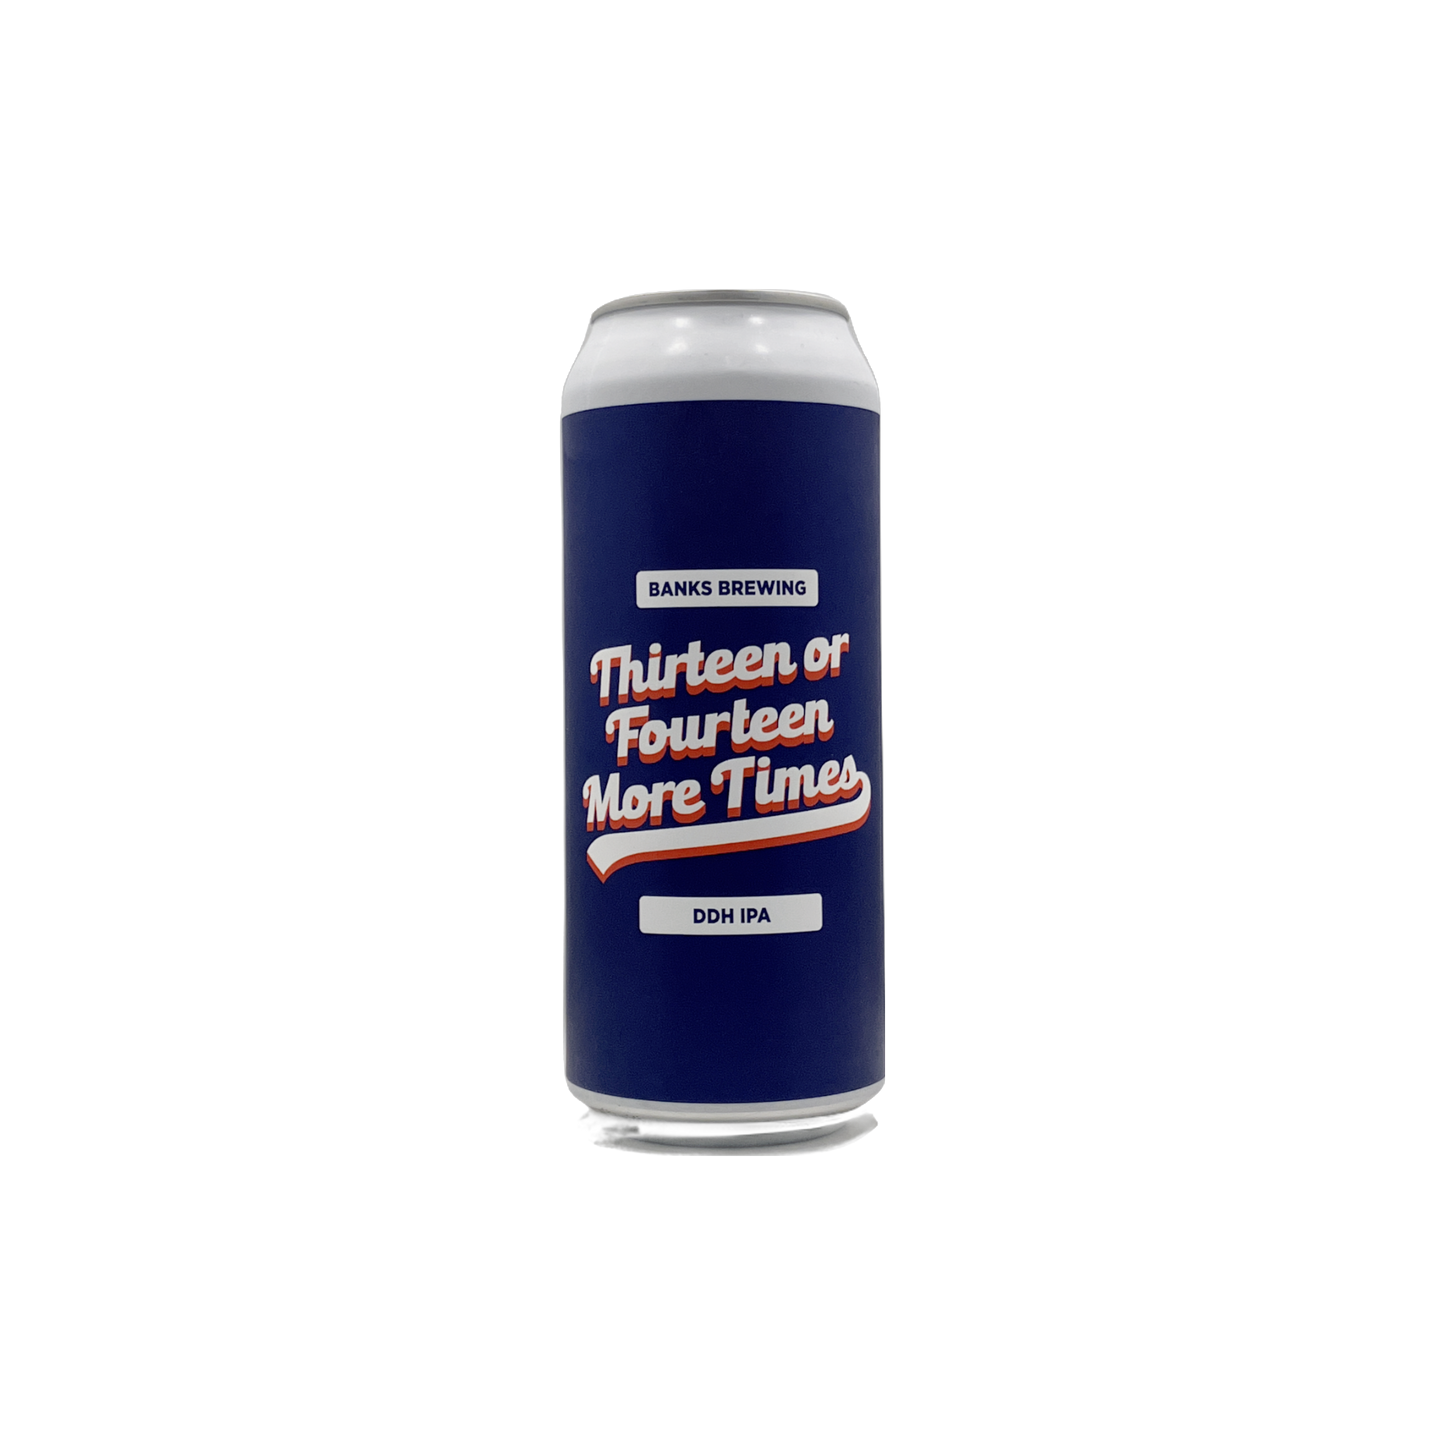 Banks Brewing Thirteen or Fourteen More Times DDH IPA 500ml